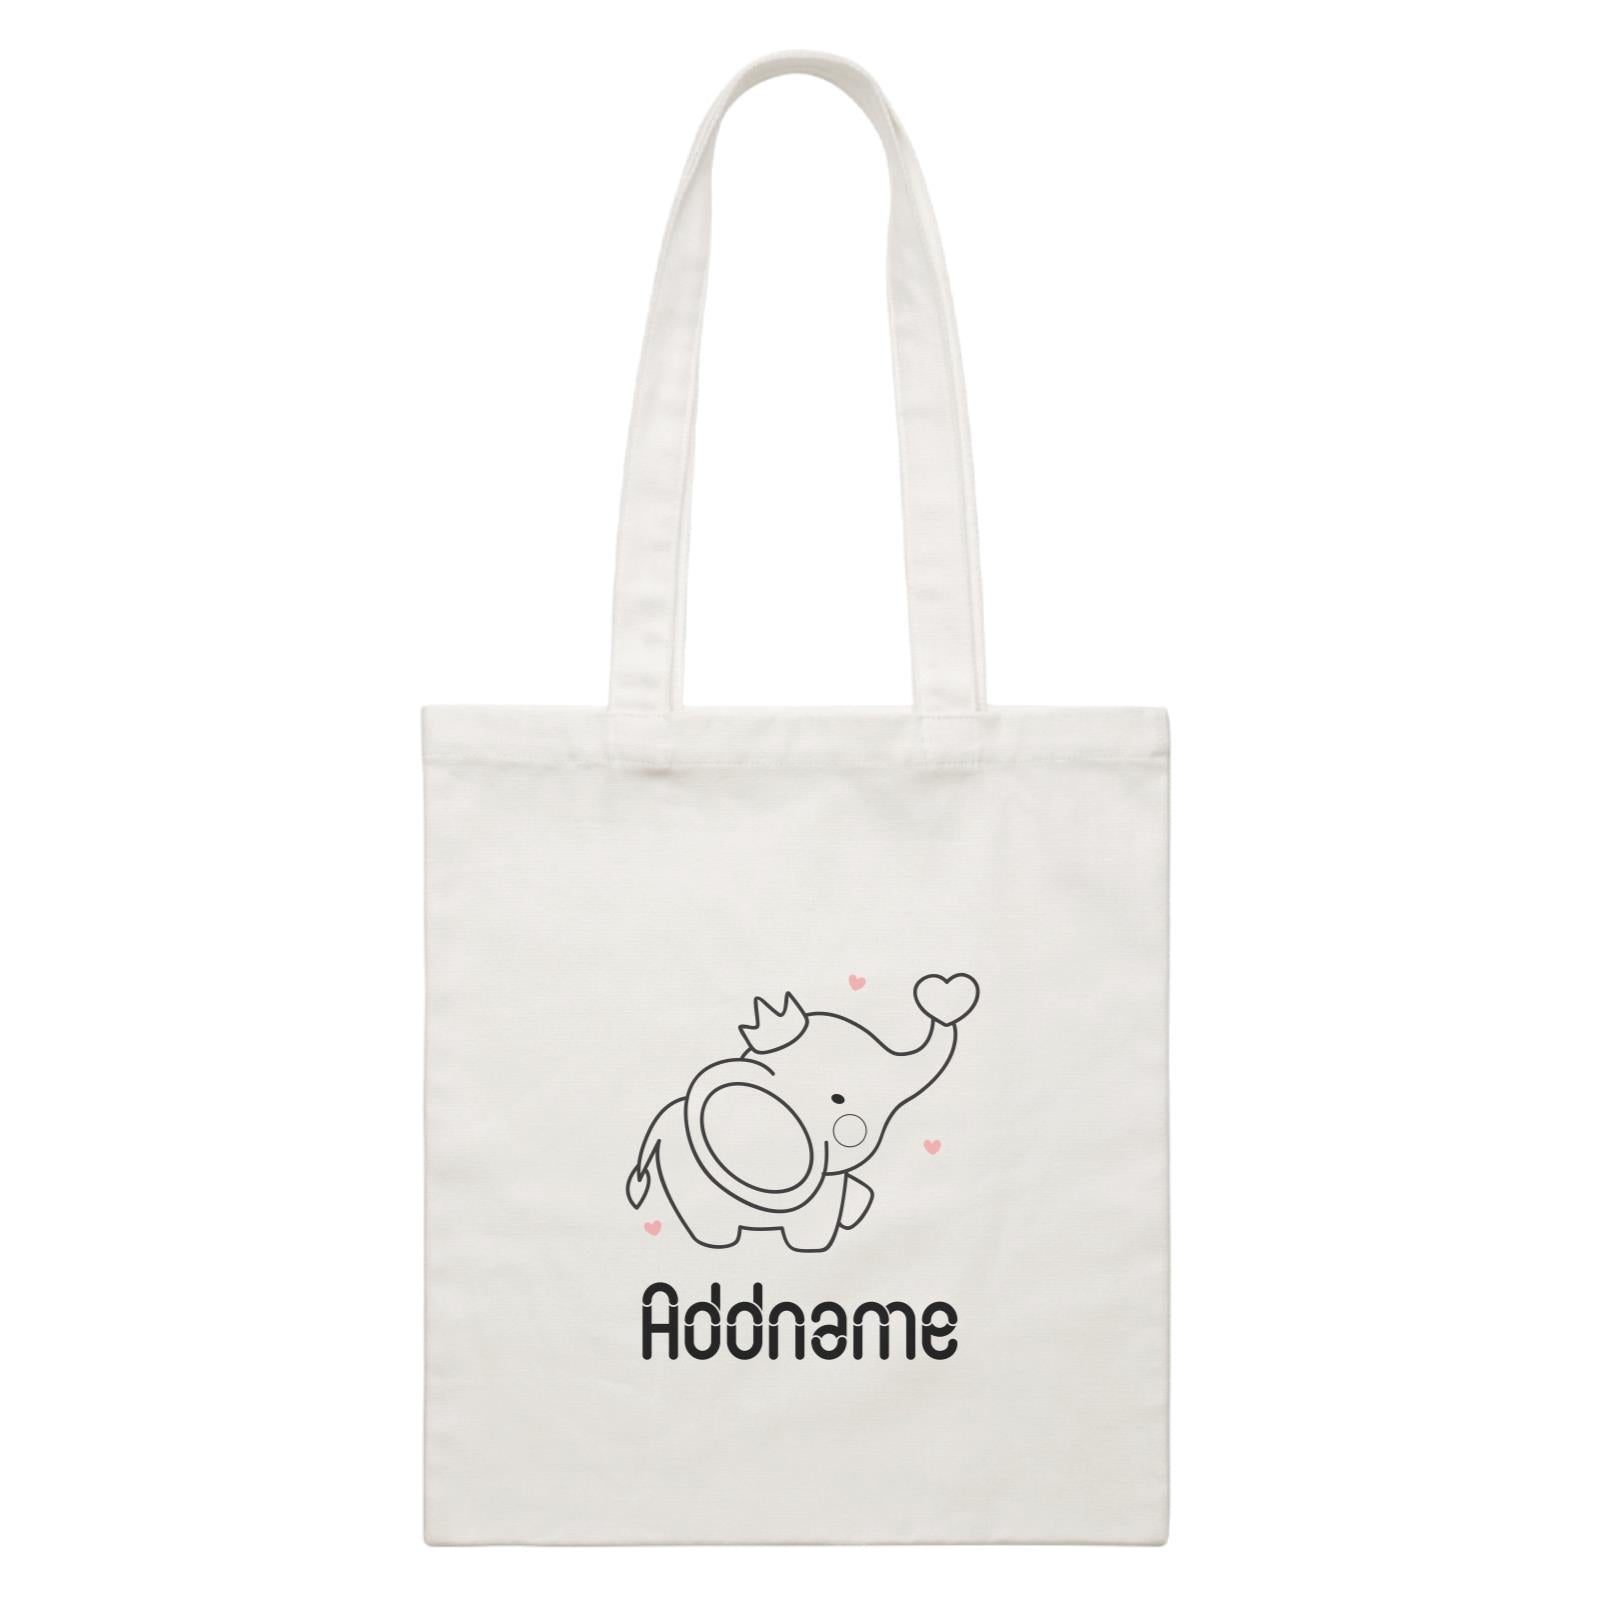 Coloring Outline Cute Hand Drawn Animals Elephants Baby Elephants With Heart And Crown Addname White White Canvas Bag